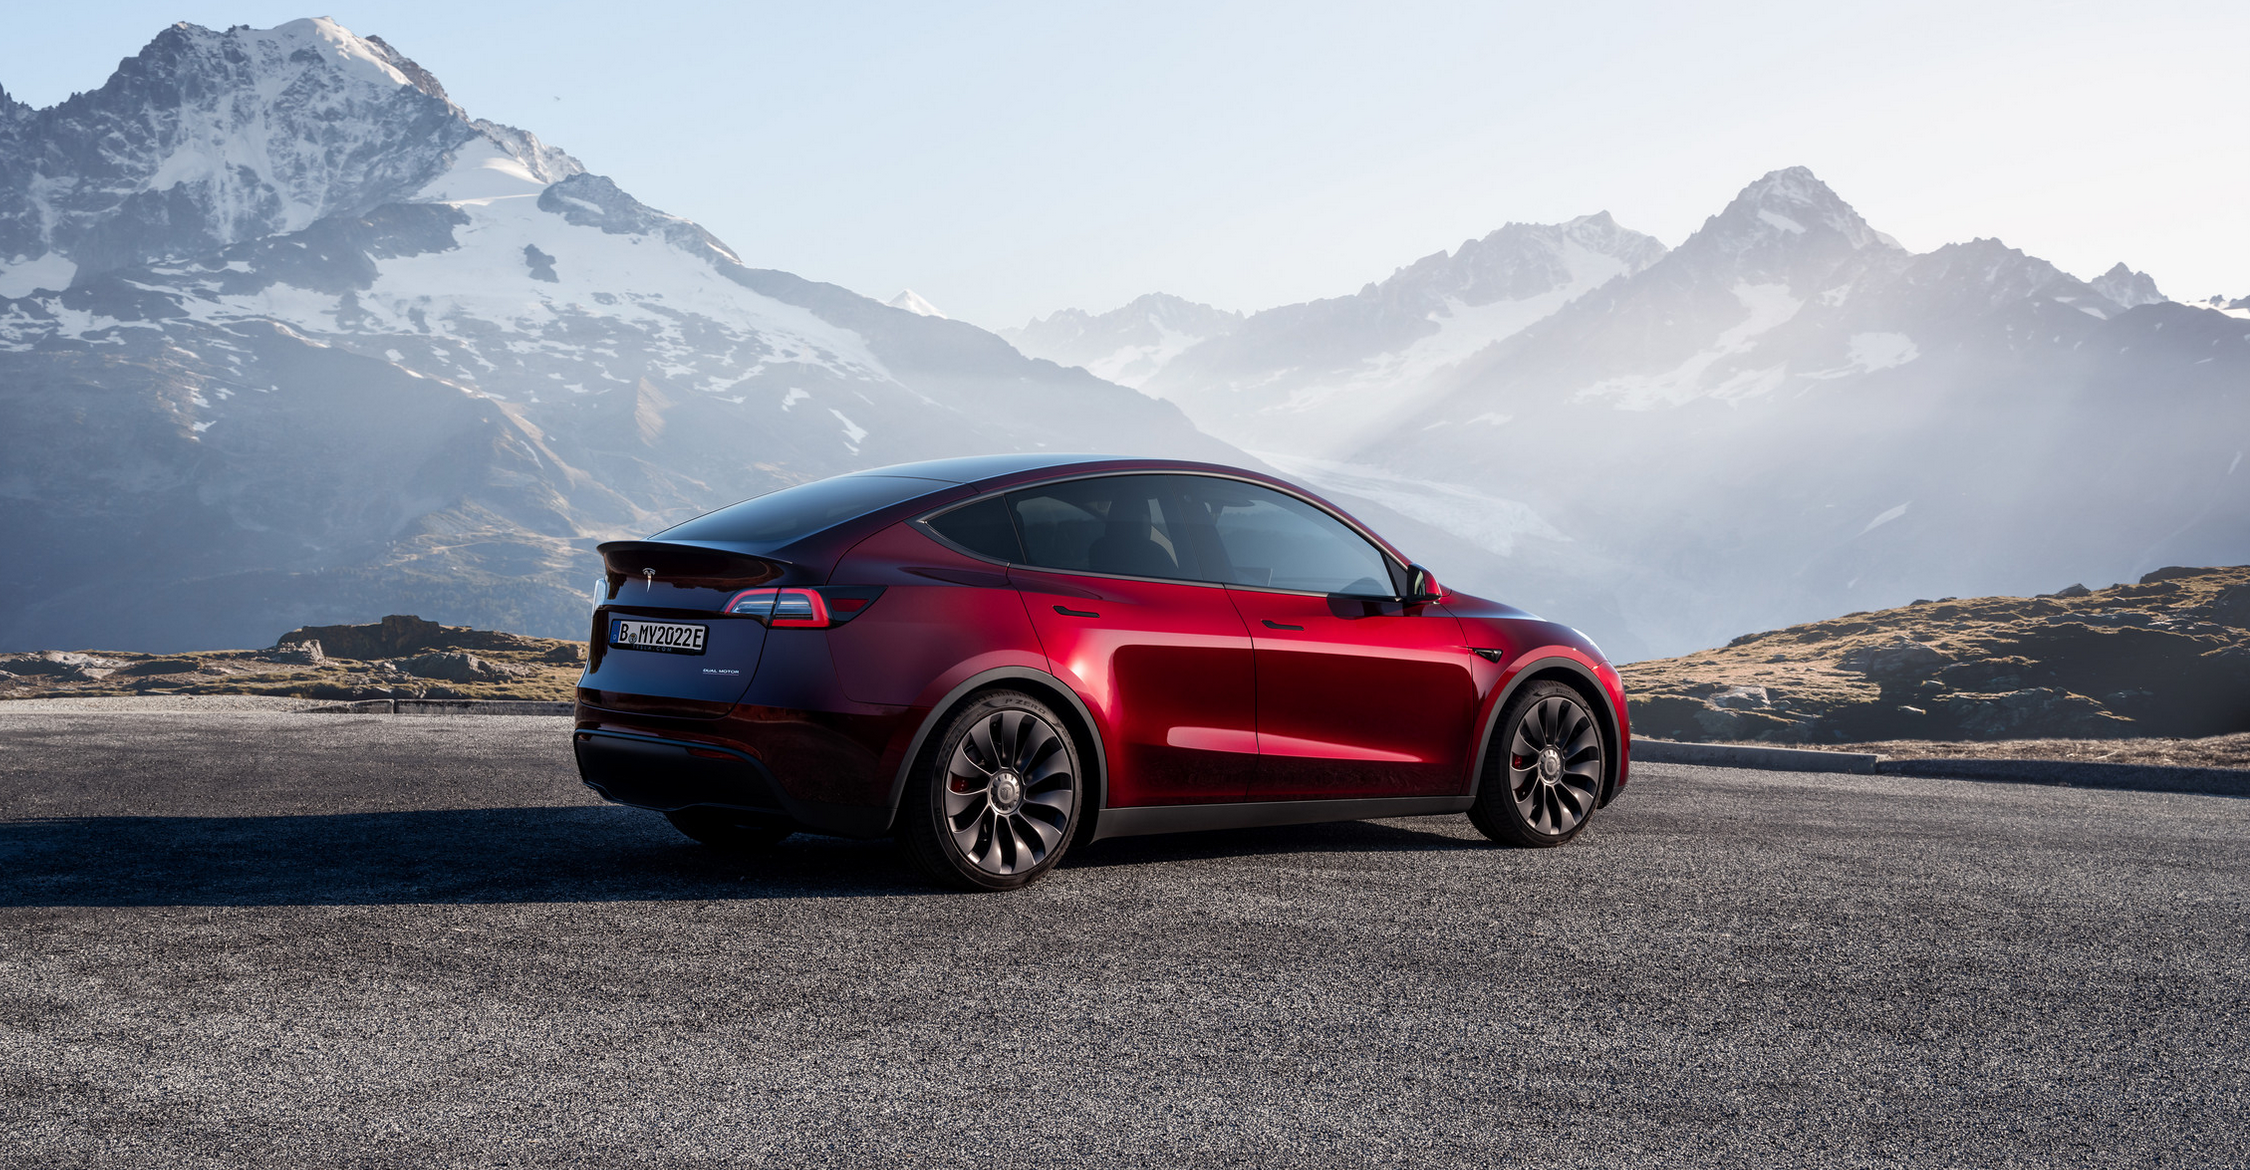 Tesla Model 3 vs. Model Y: What's the Difference?